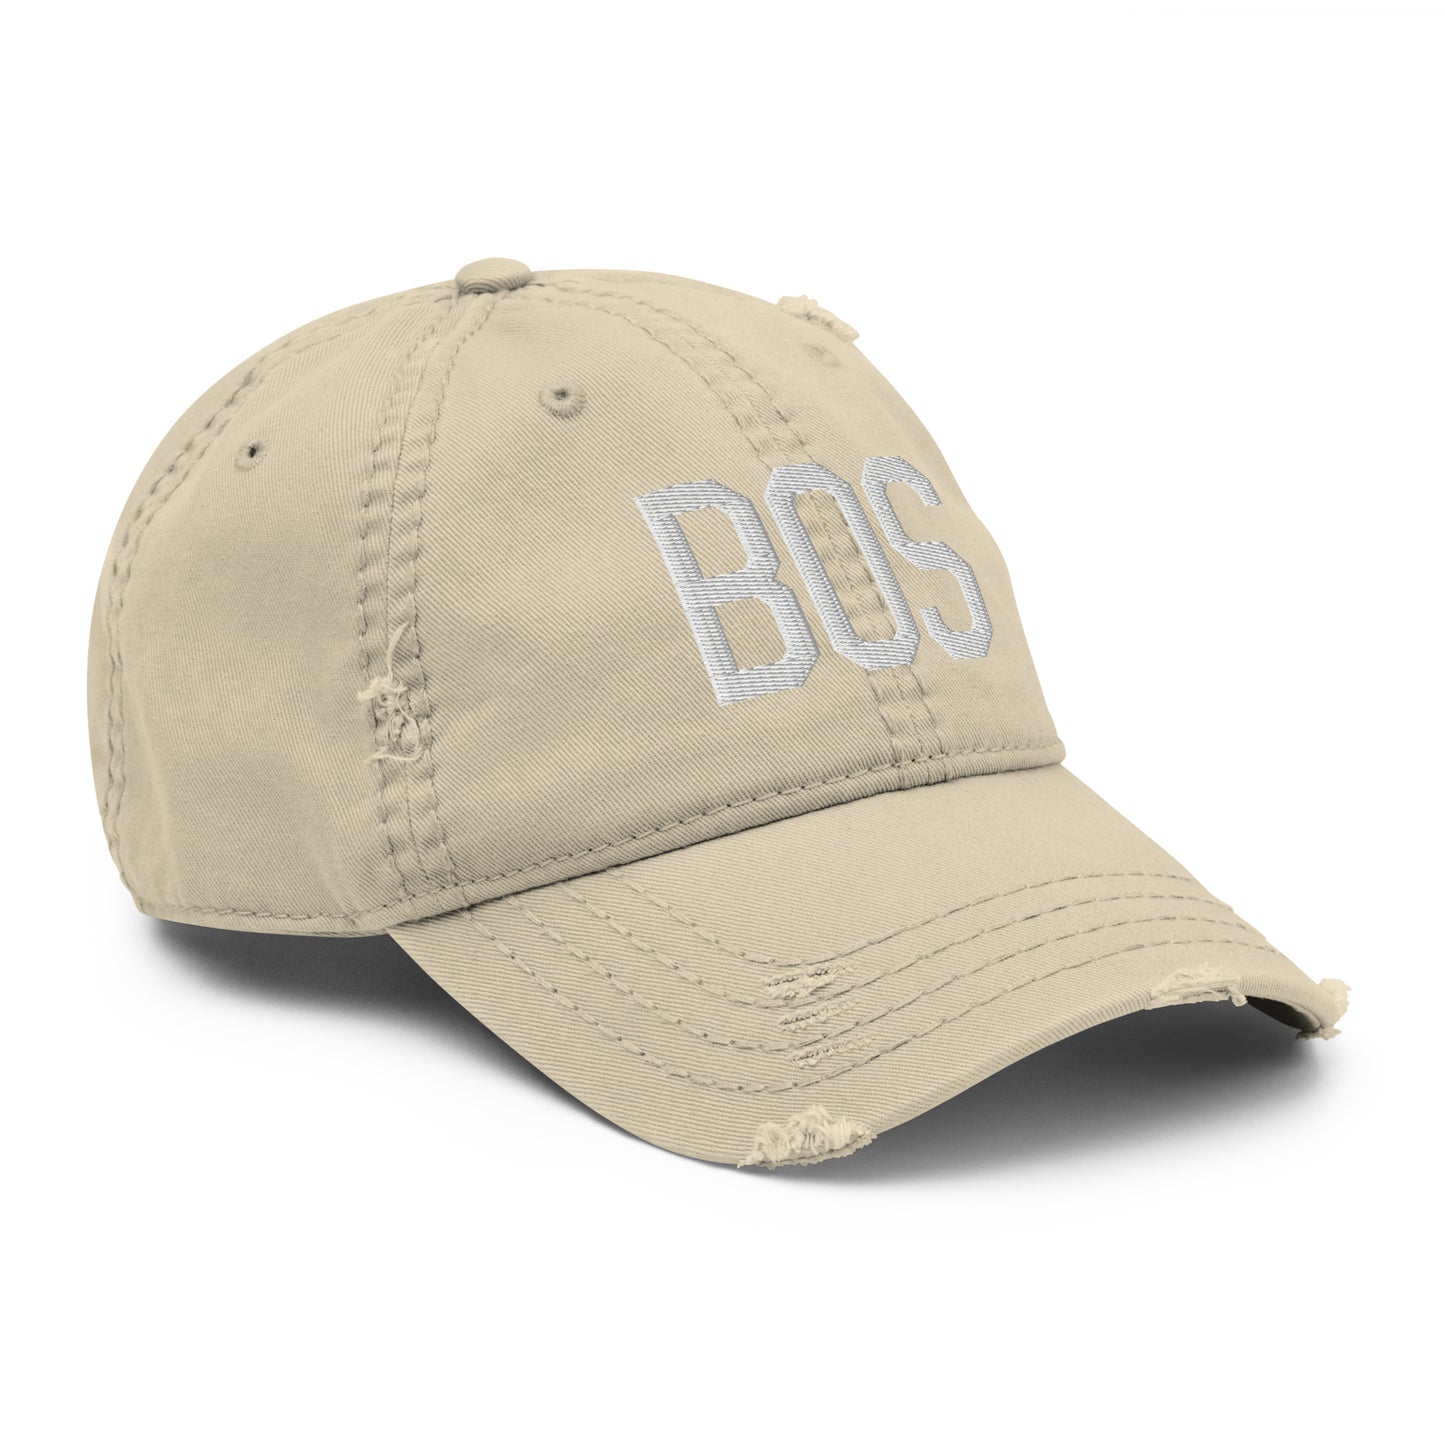 Airport Code Distressed Hat - White • BOS Boston • YHM Designs - Image 20